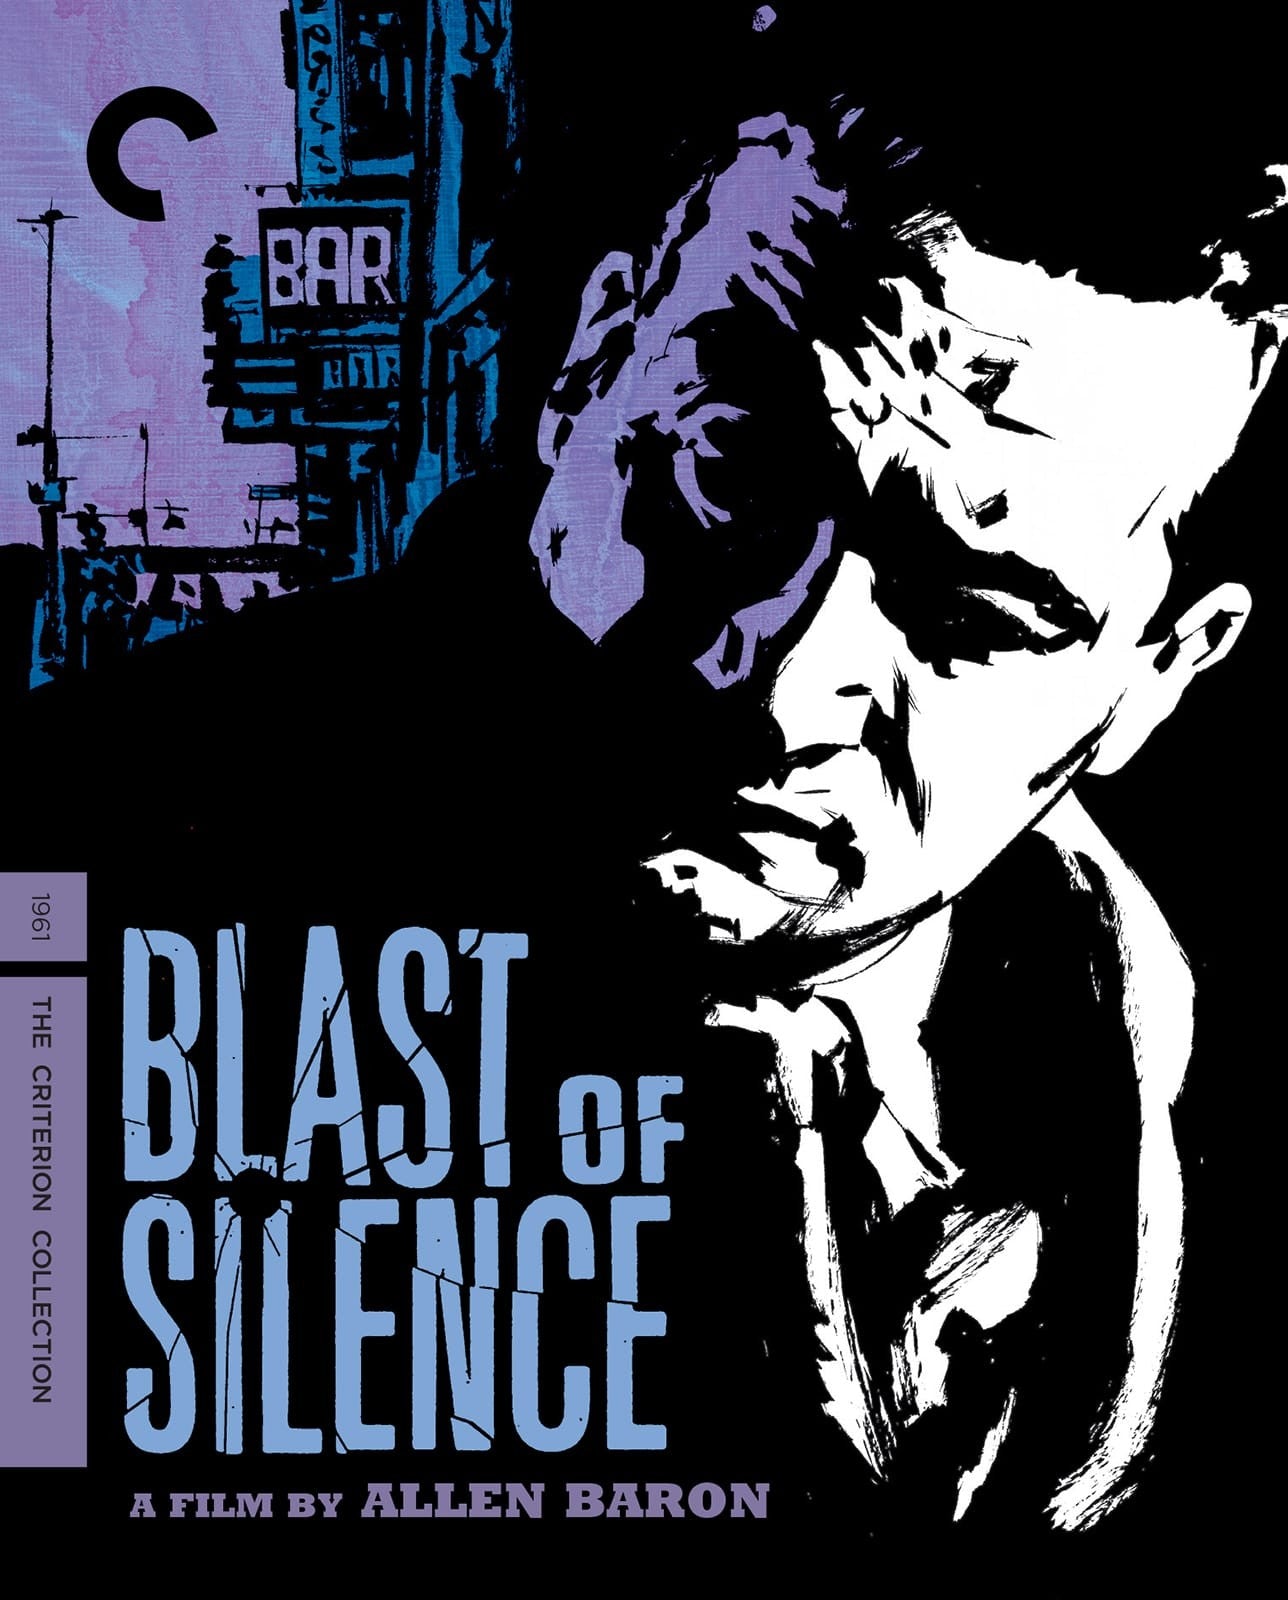 Blast of Silence Blu-ray (Criterion Collection)